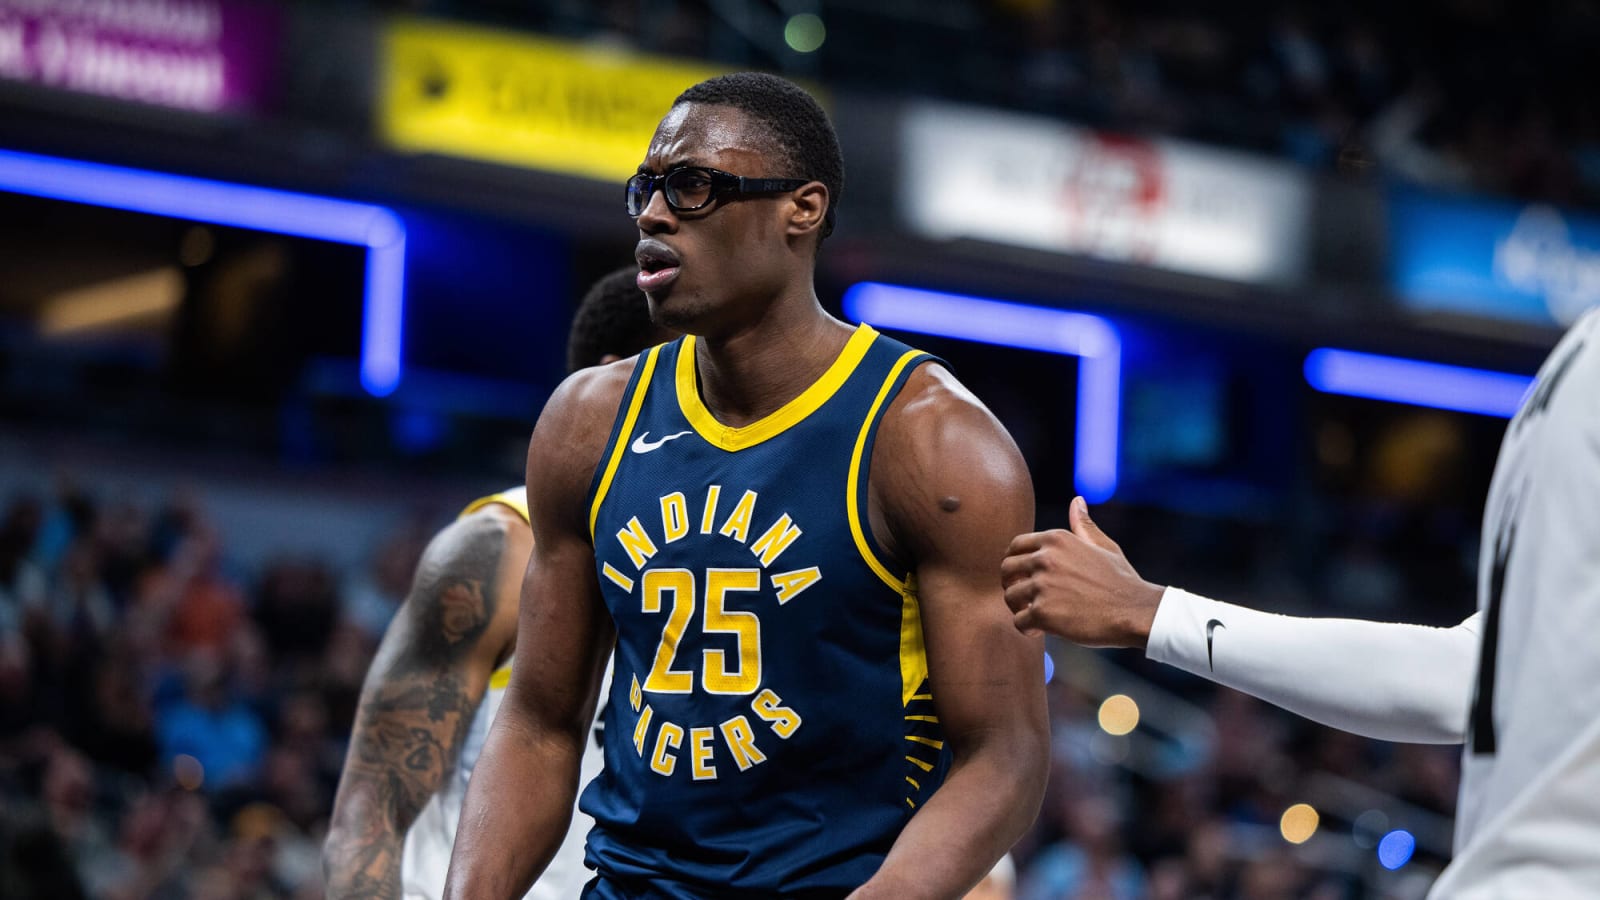 Indiana Pacers turn to Isaiah Jackson and Jalen Smith frontcourt pairing to take down Detroit Pistons